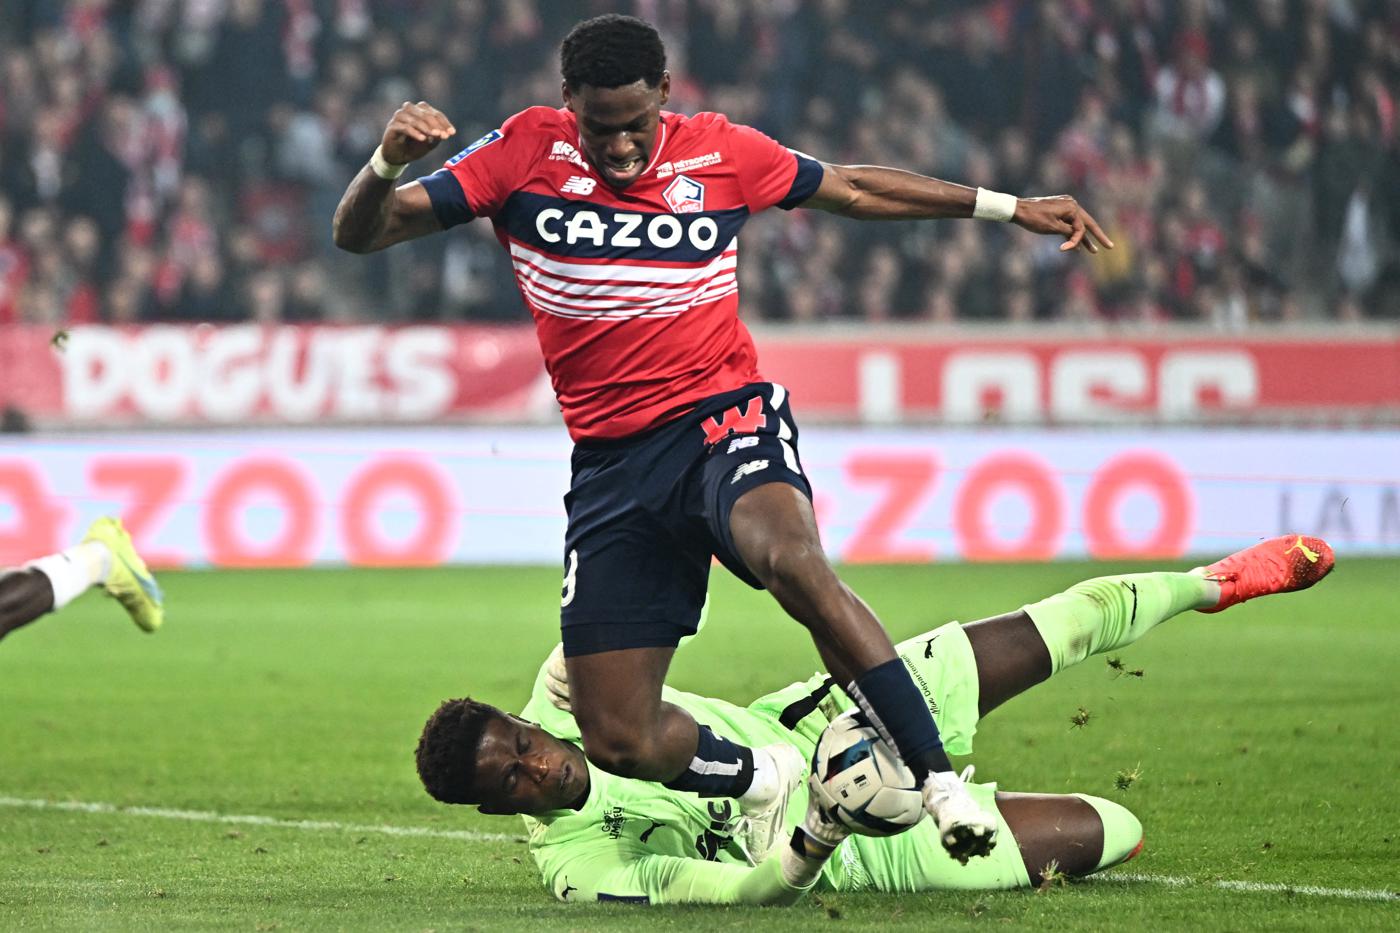 Lance - Lille - 1:1. French Championship, round 26. Match review, statistics.